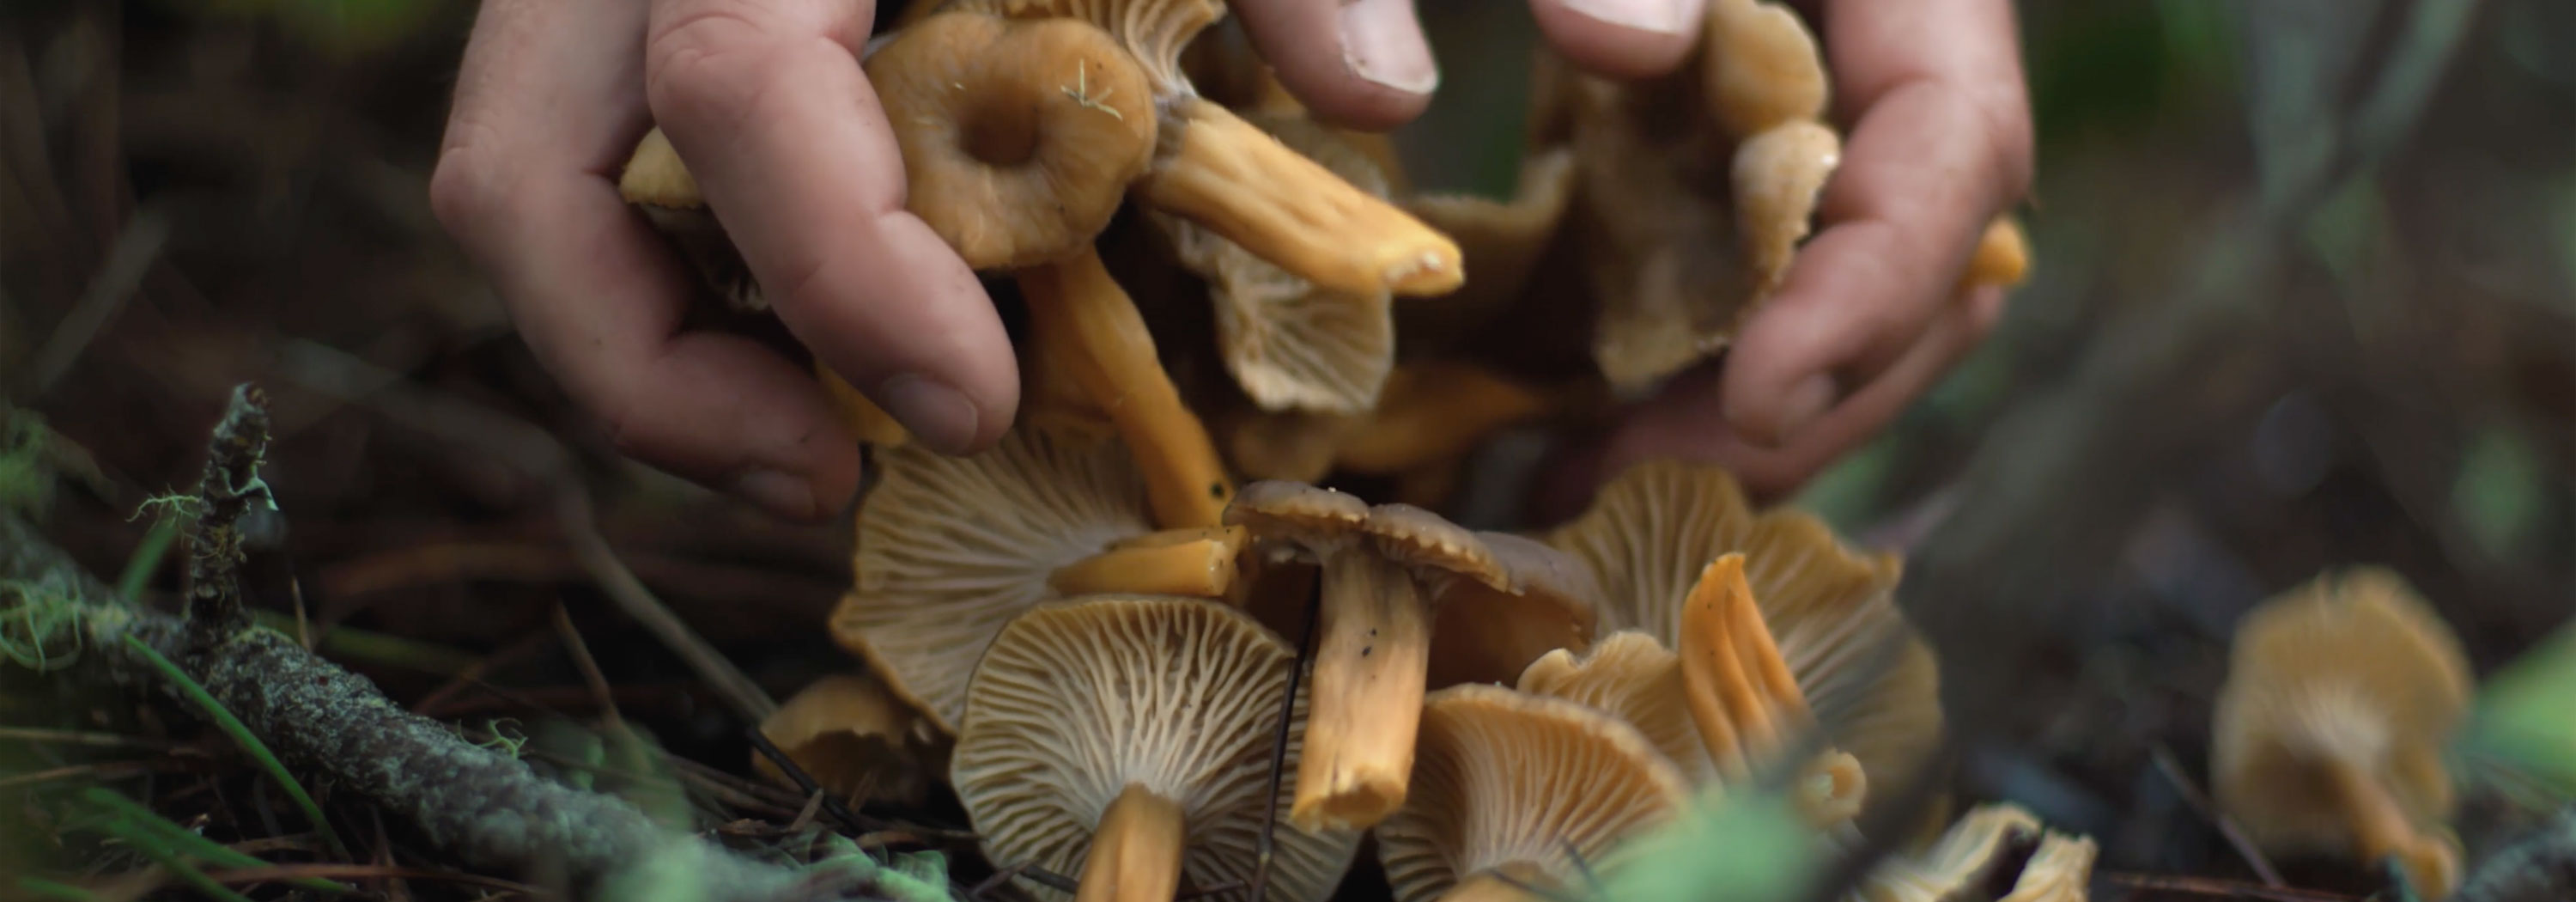 Mushrooms are good for you